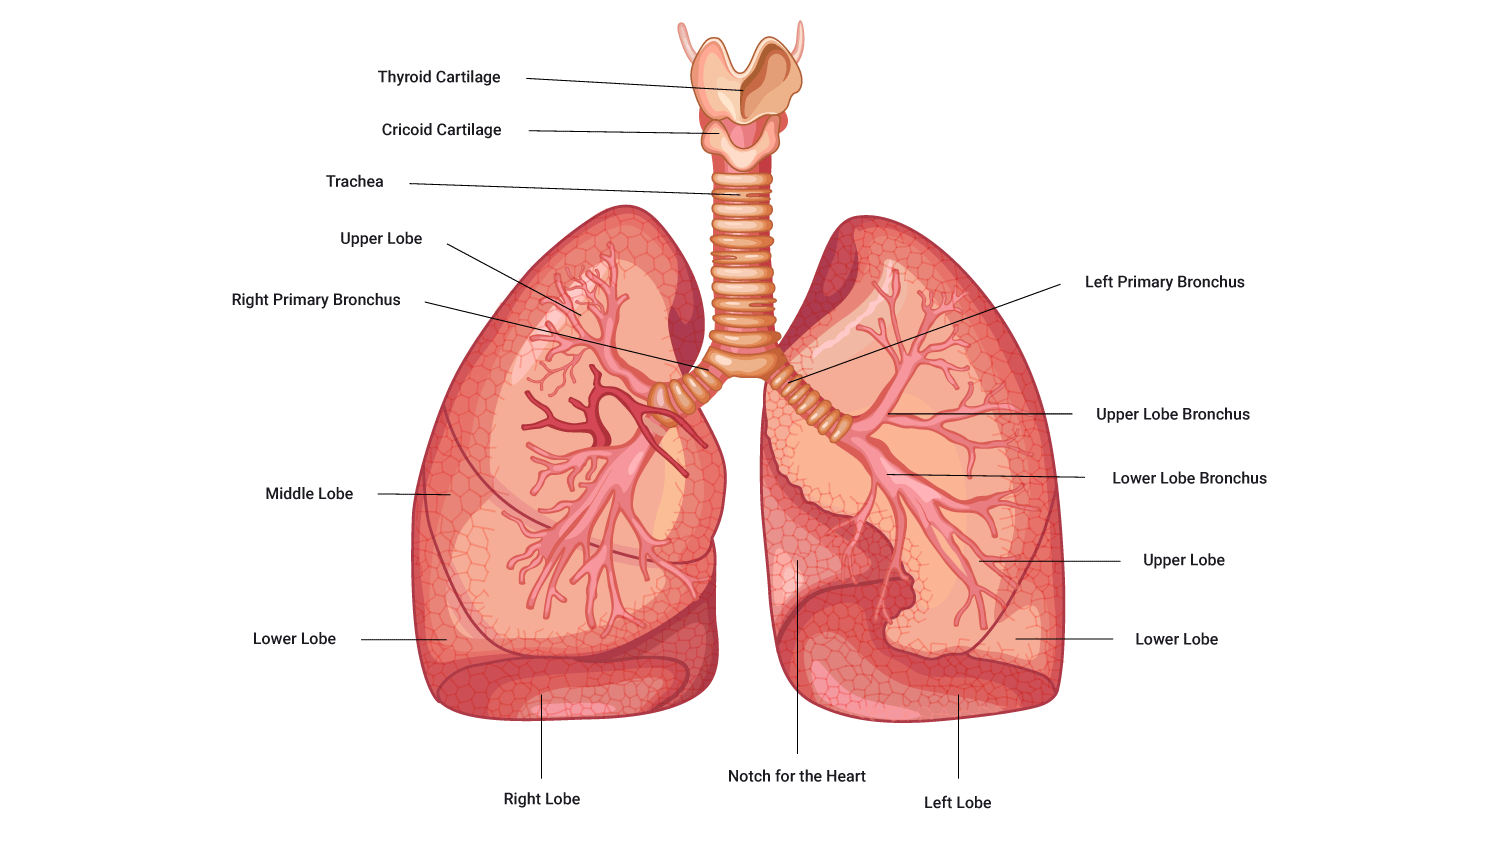 Image showing anatomy of human lungs